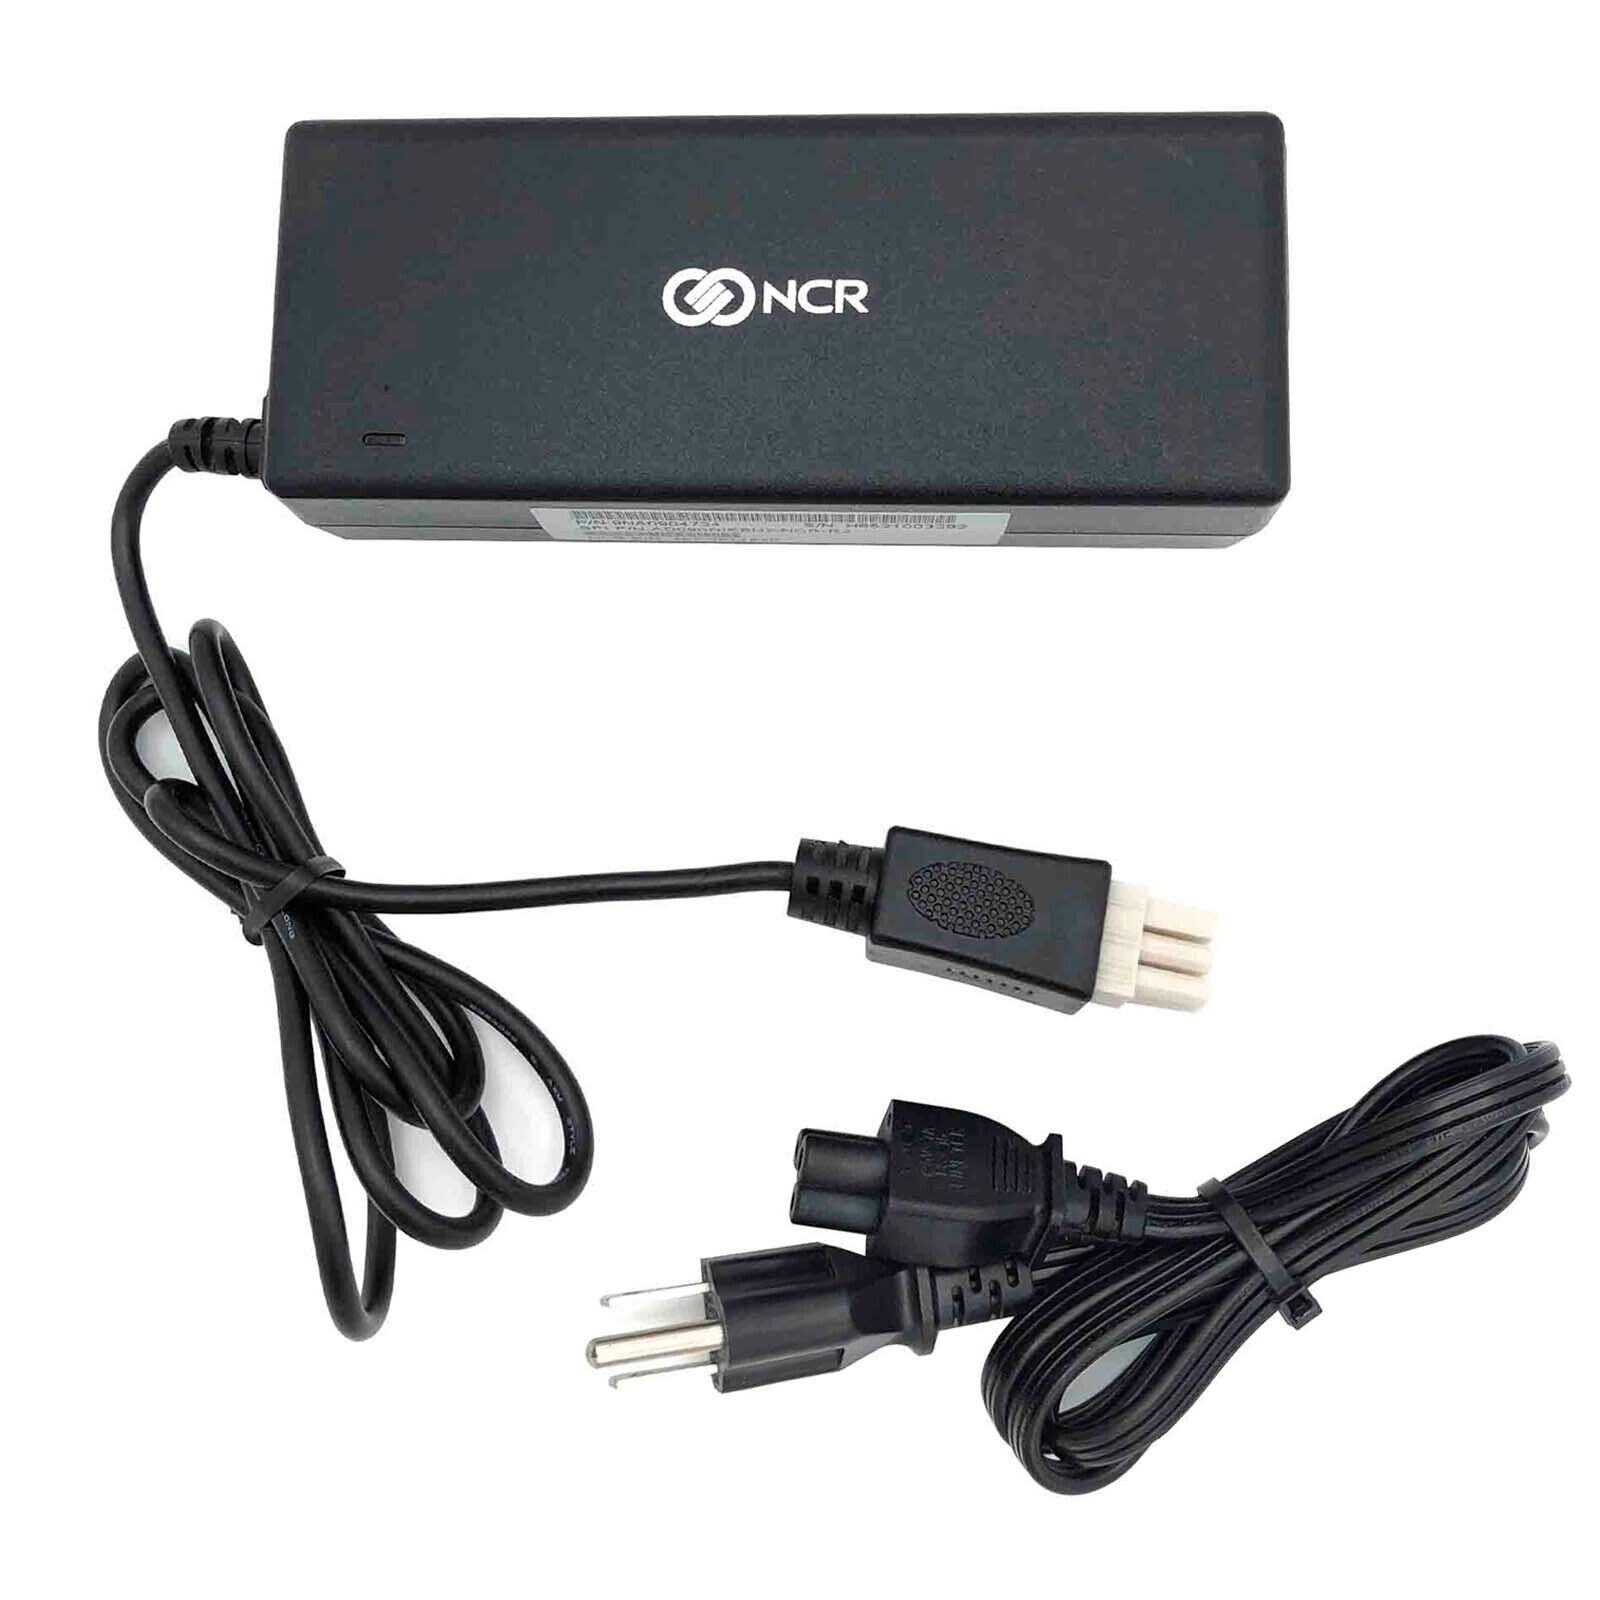 Genuine FSP Power Adapter for POS Touchscreen Terminal NCR 7754-0035-8801 w/PC Brand NCR Series NCR 7754-0035-8801 Mode